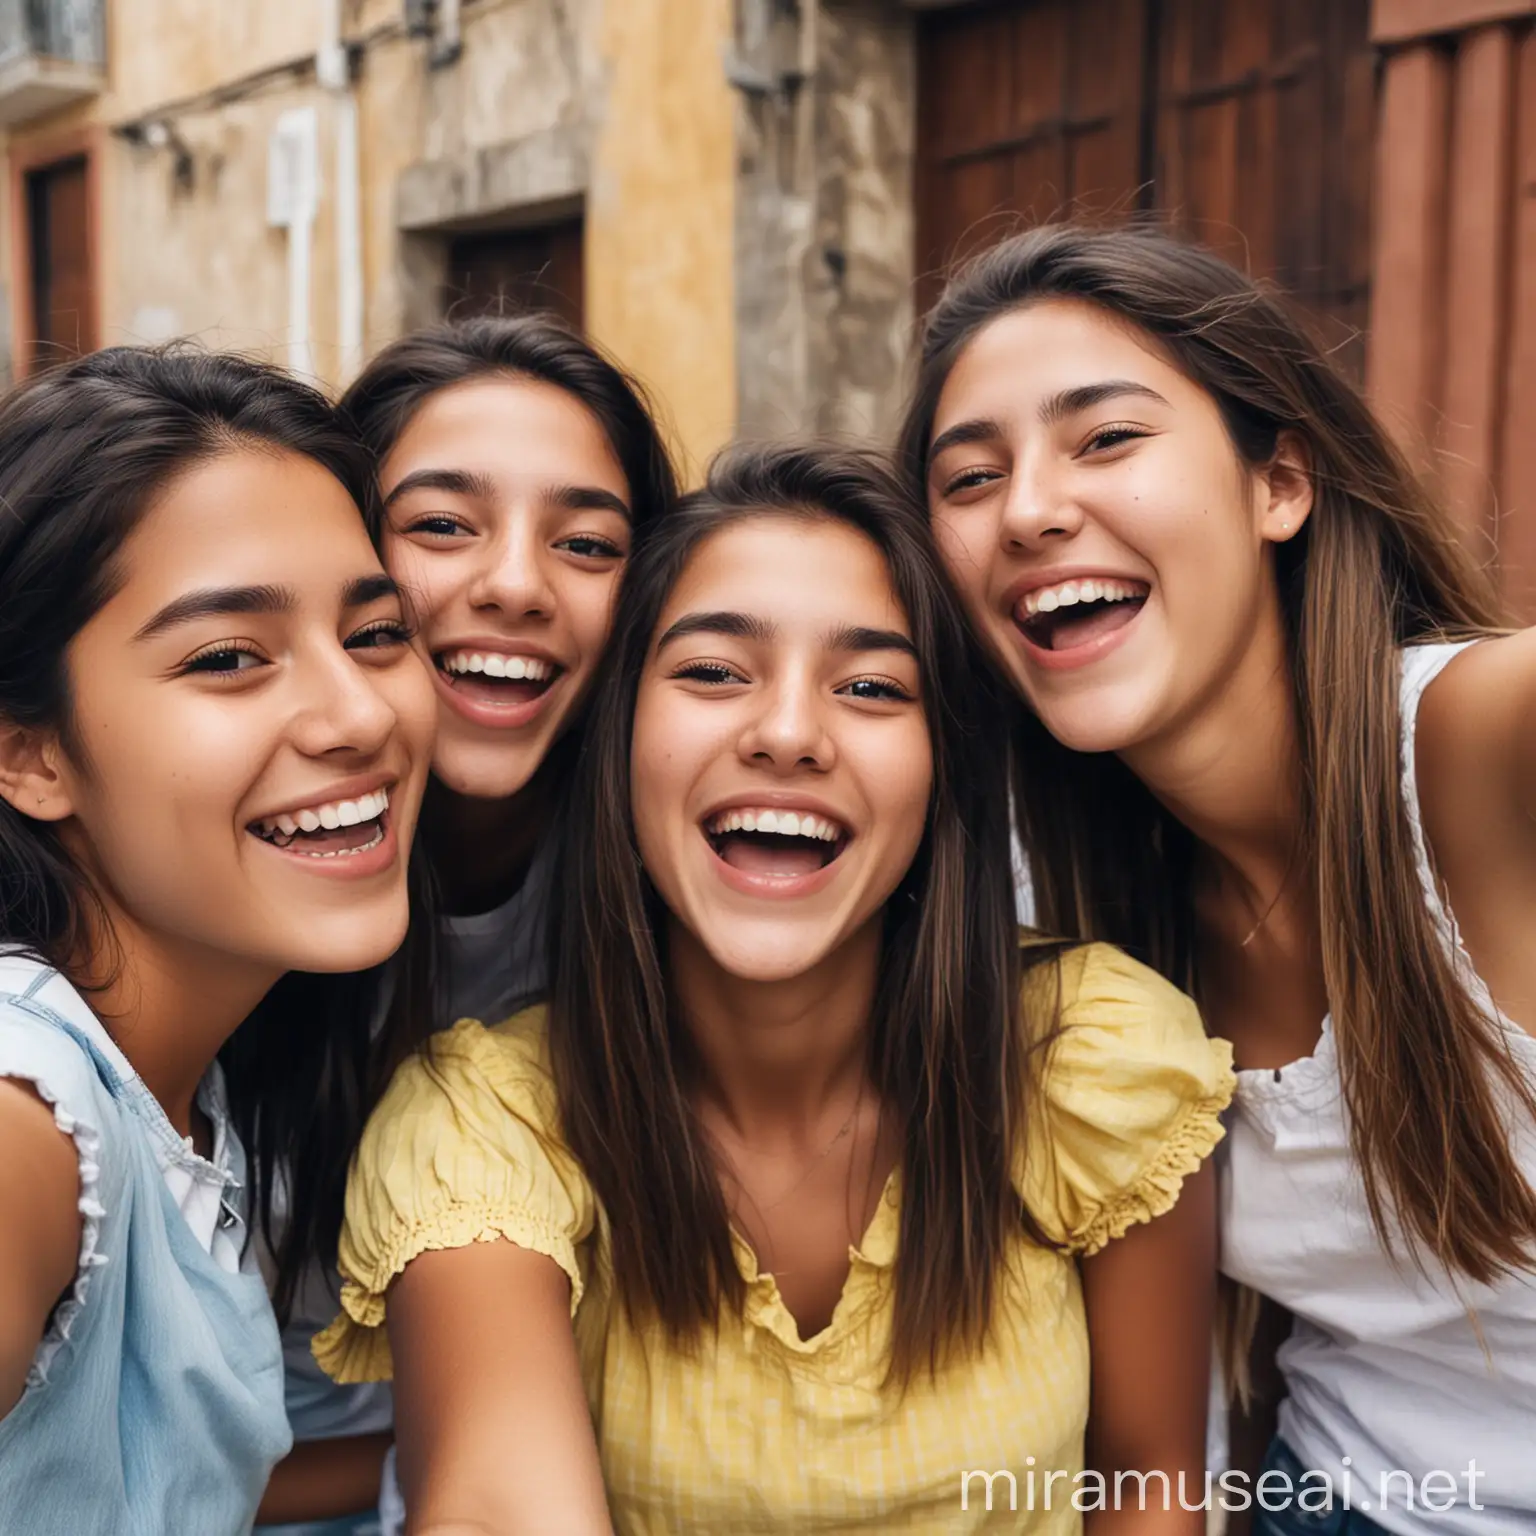 colombian teenager girl taking selfie with her friends laughing